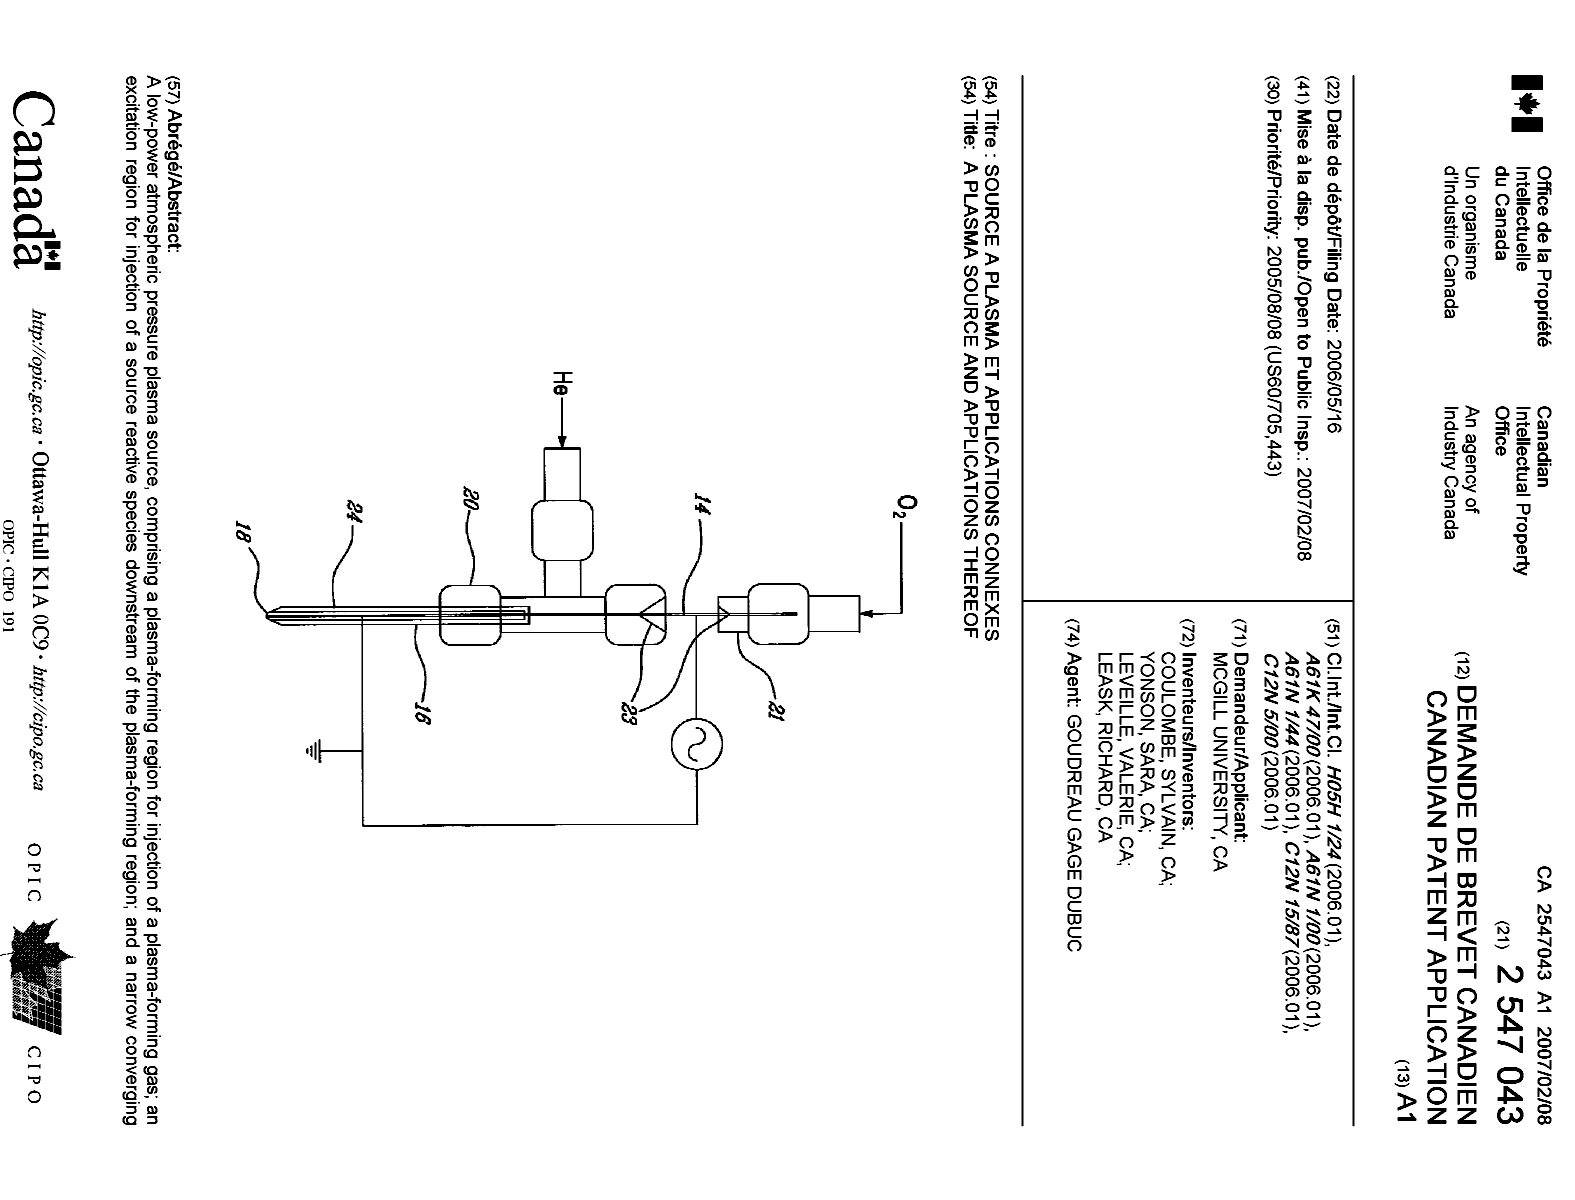 Canadian Patent Document 2547043. Cover Page 20061230. Image 1 of 2